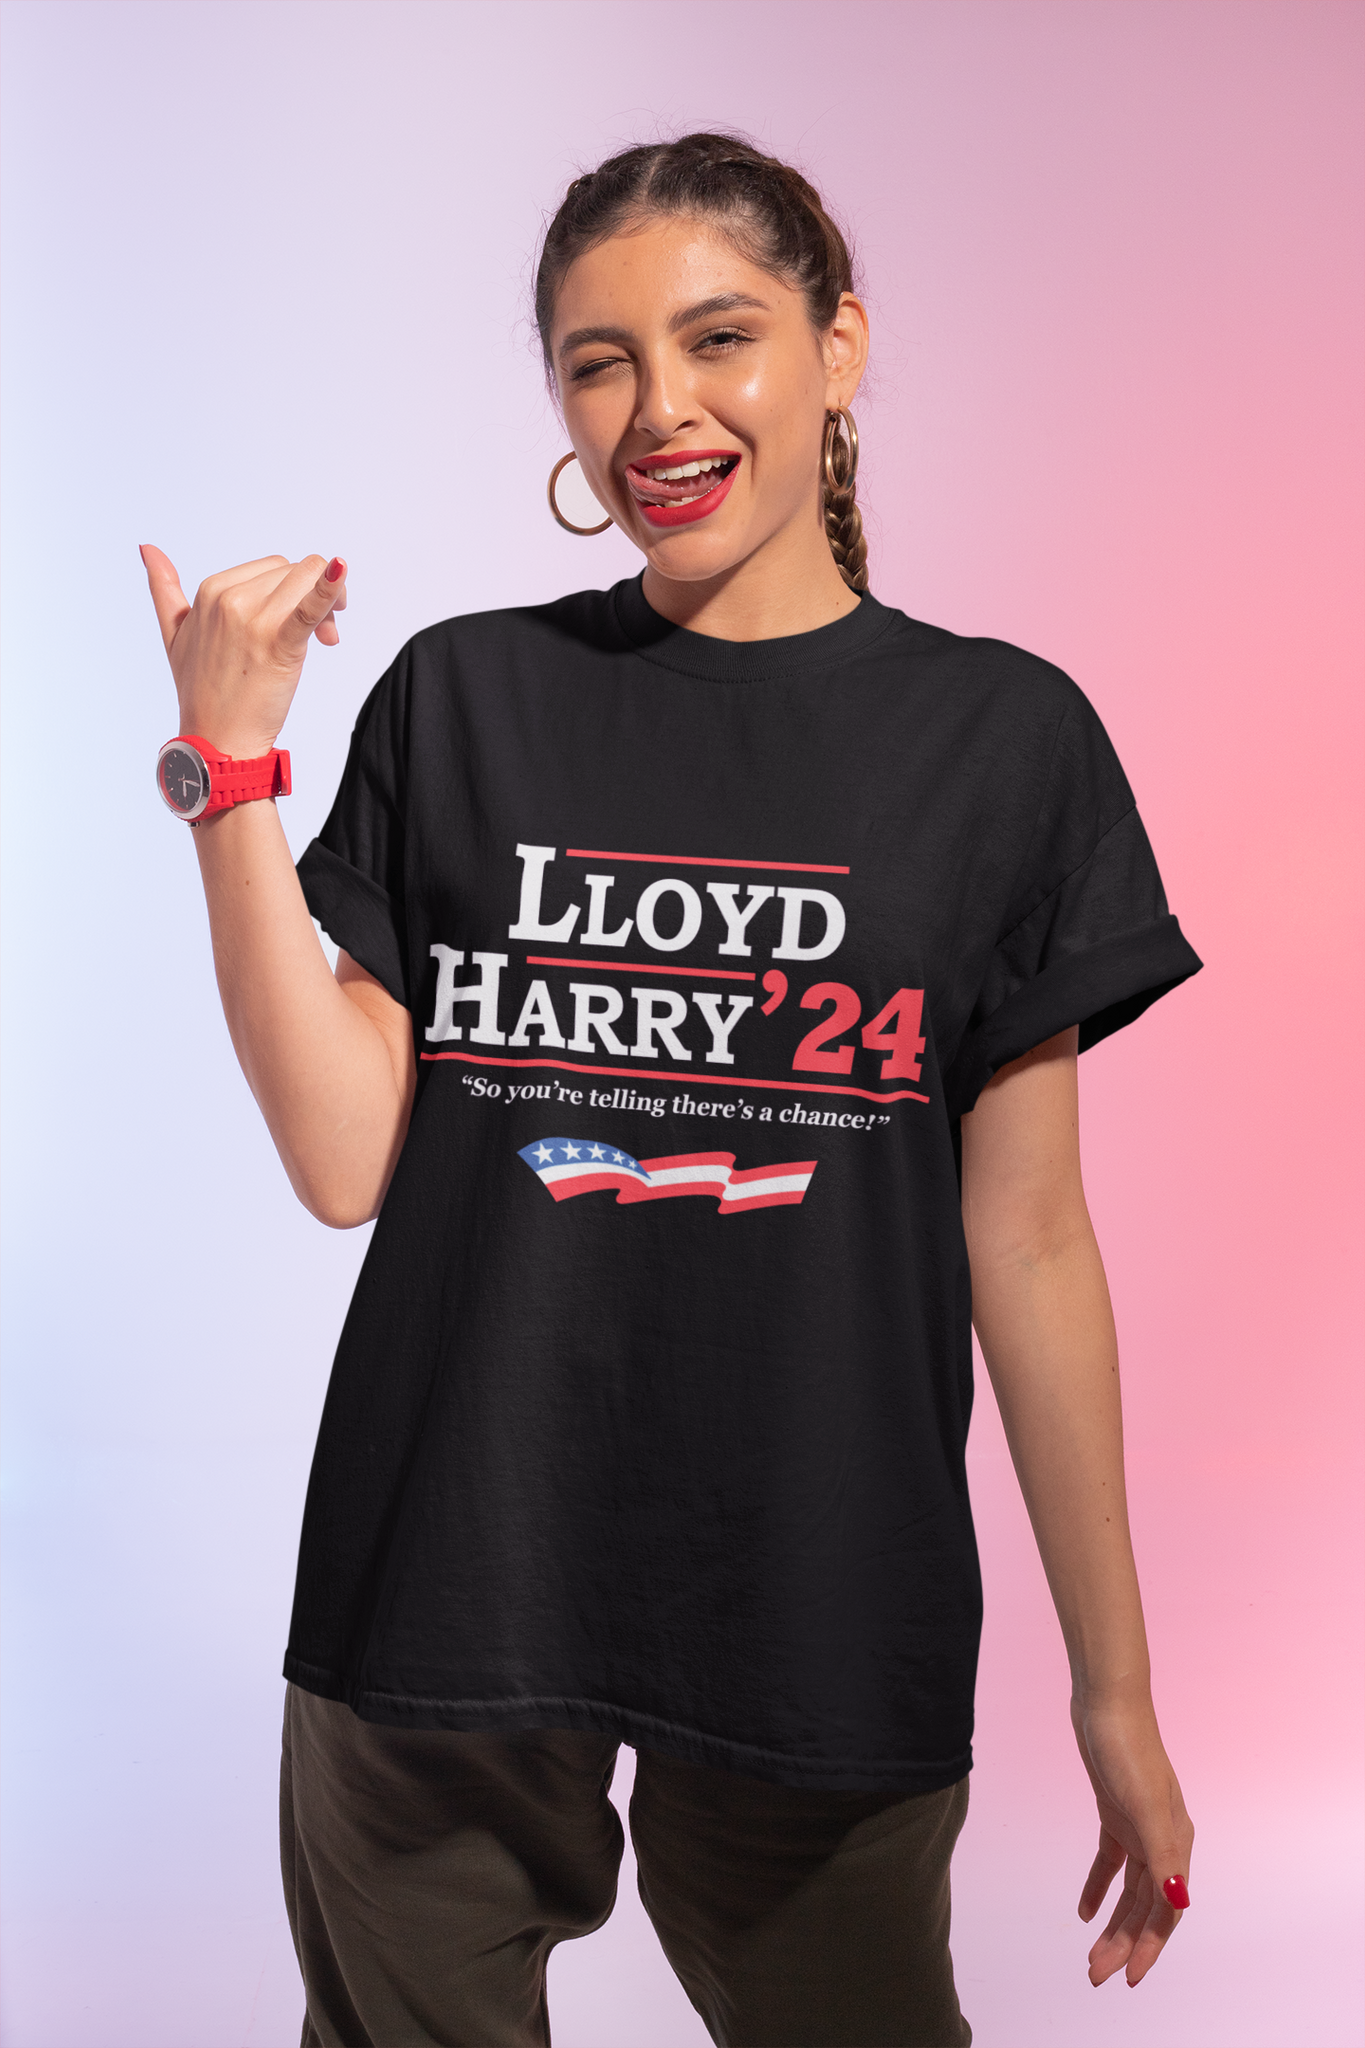 Dumb And Dumber T Shirt, Lloyd Harry For 2024 President T Shirt, So Youre Telling Theres A Chance Tshirt